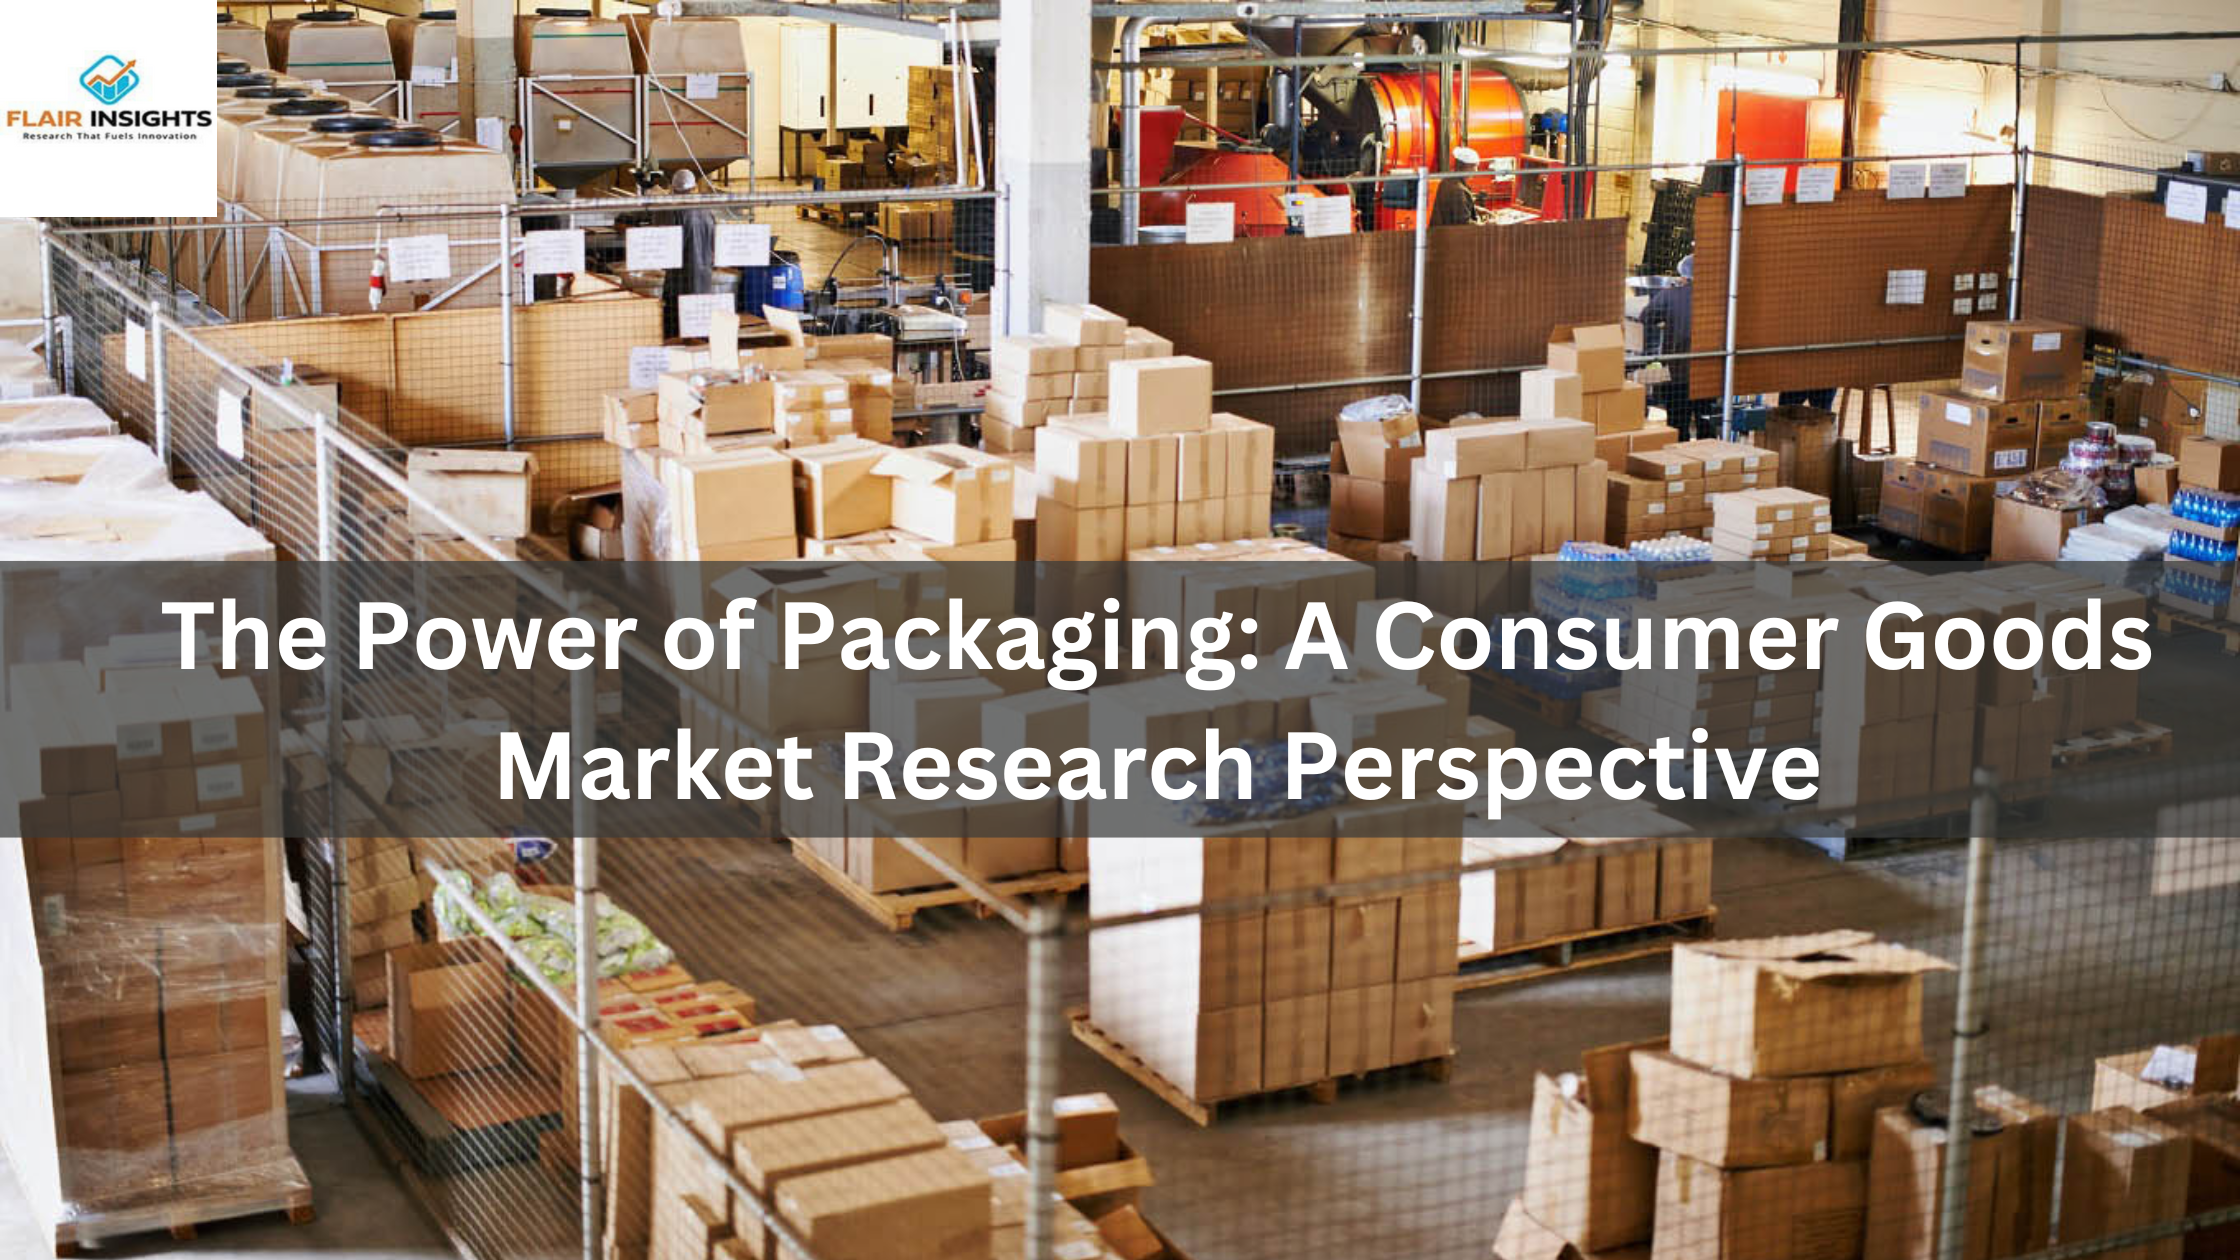 The Power of Packaging: A Consumer Goods Market Research Perspective